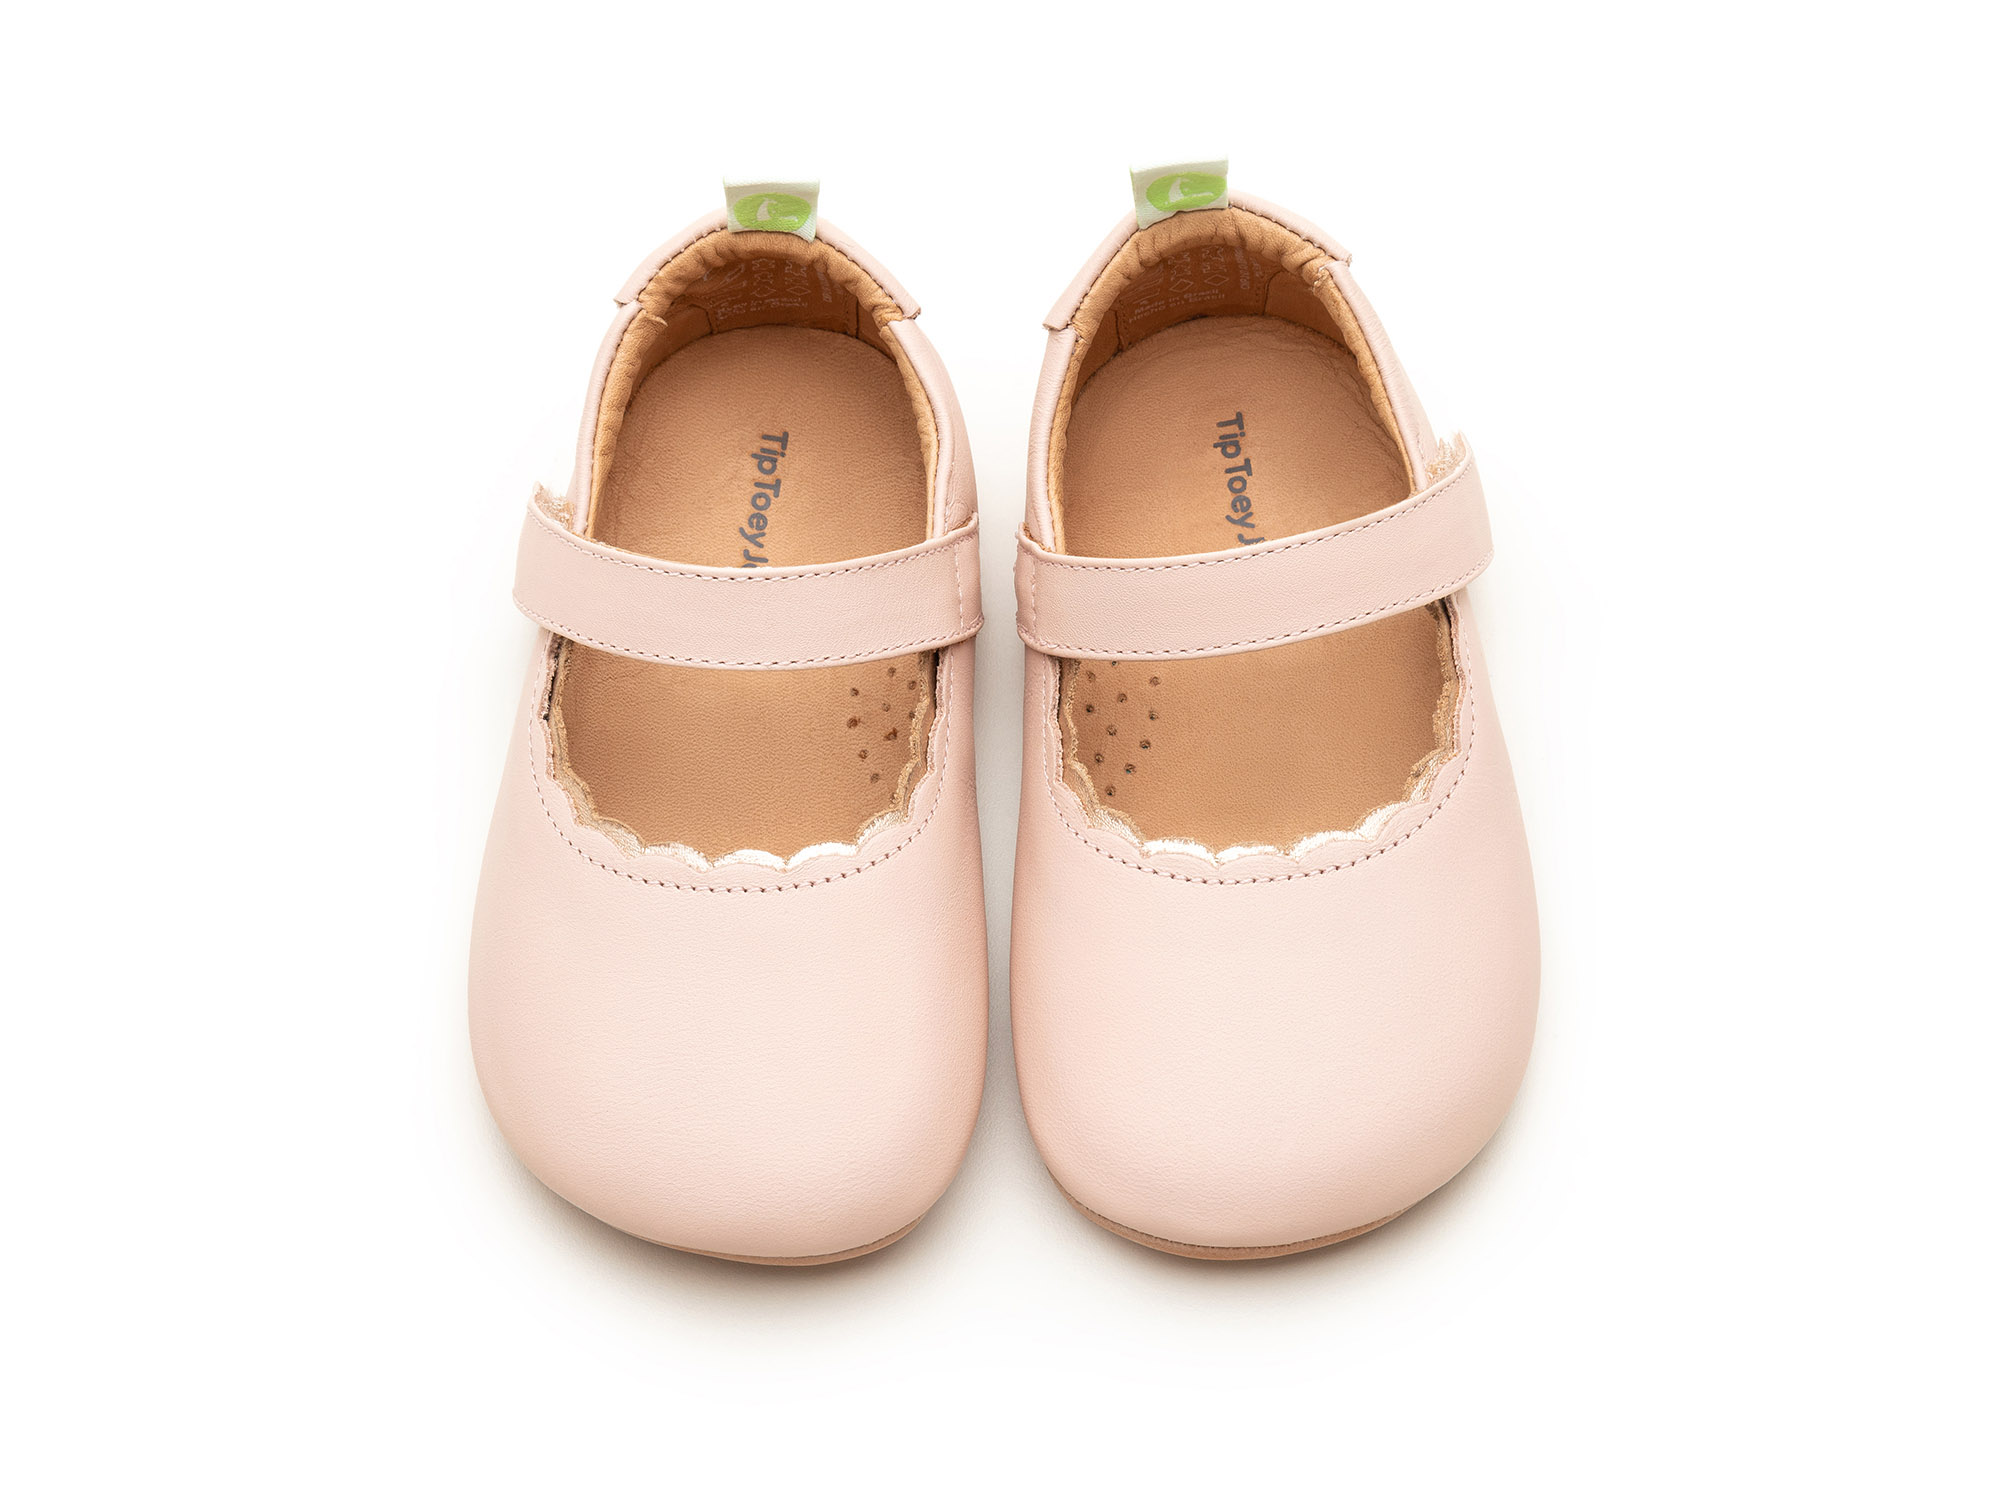 UP & GO Mary Janes for Girls Roundy | Tip Toey Joey - Australia - 5